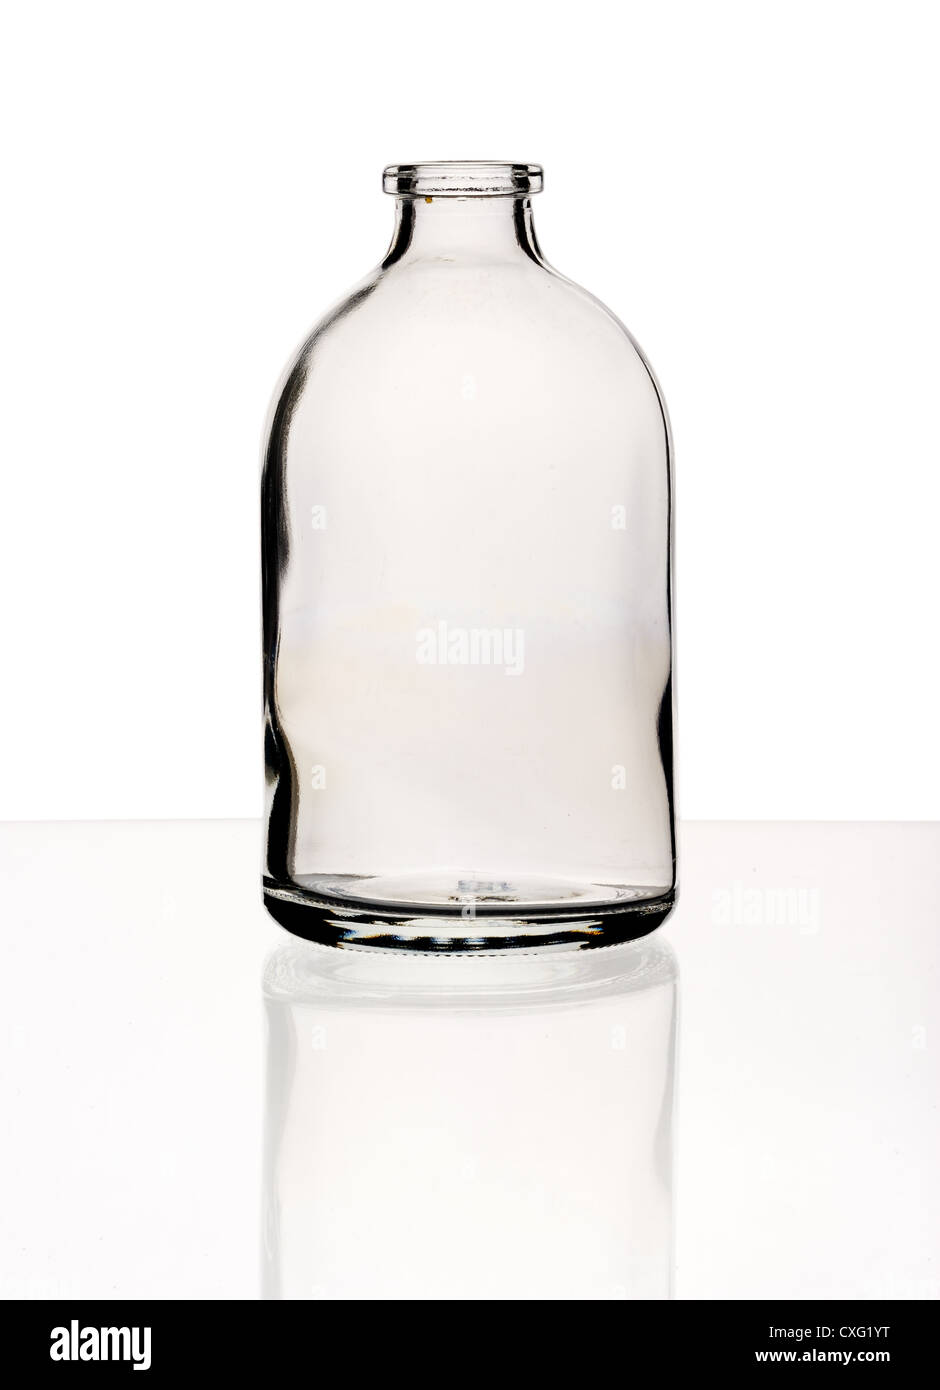 Empty glass vial, isolated on a white background. Stock Photo